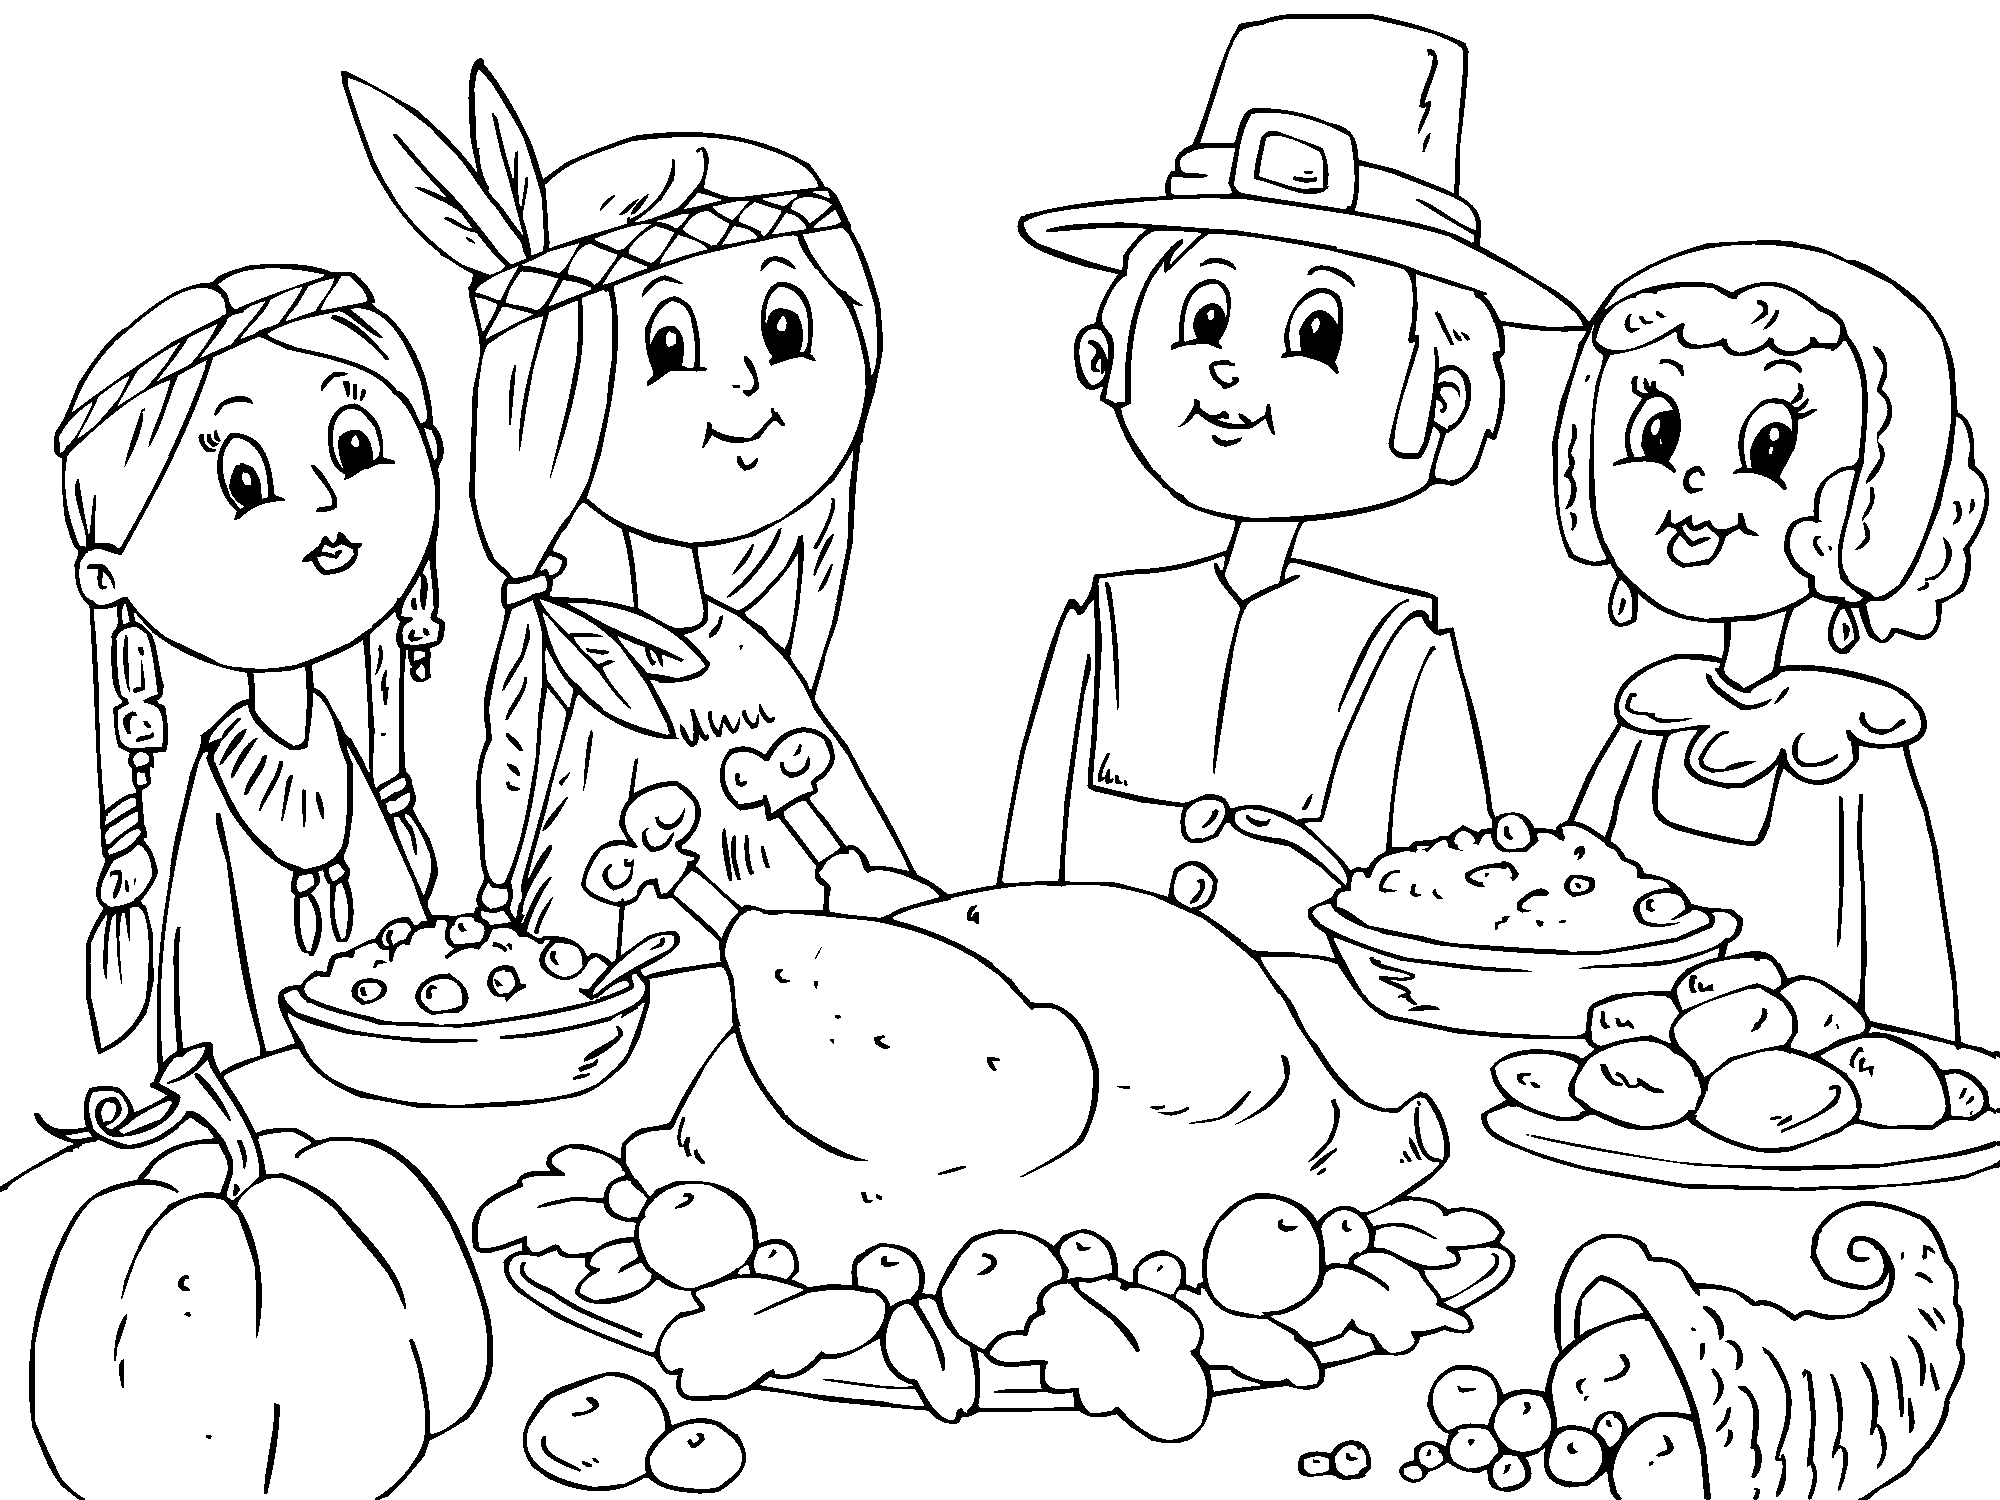 Coloring Pages Thanksgiving crafts 0 This page has lots of free printable